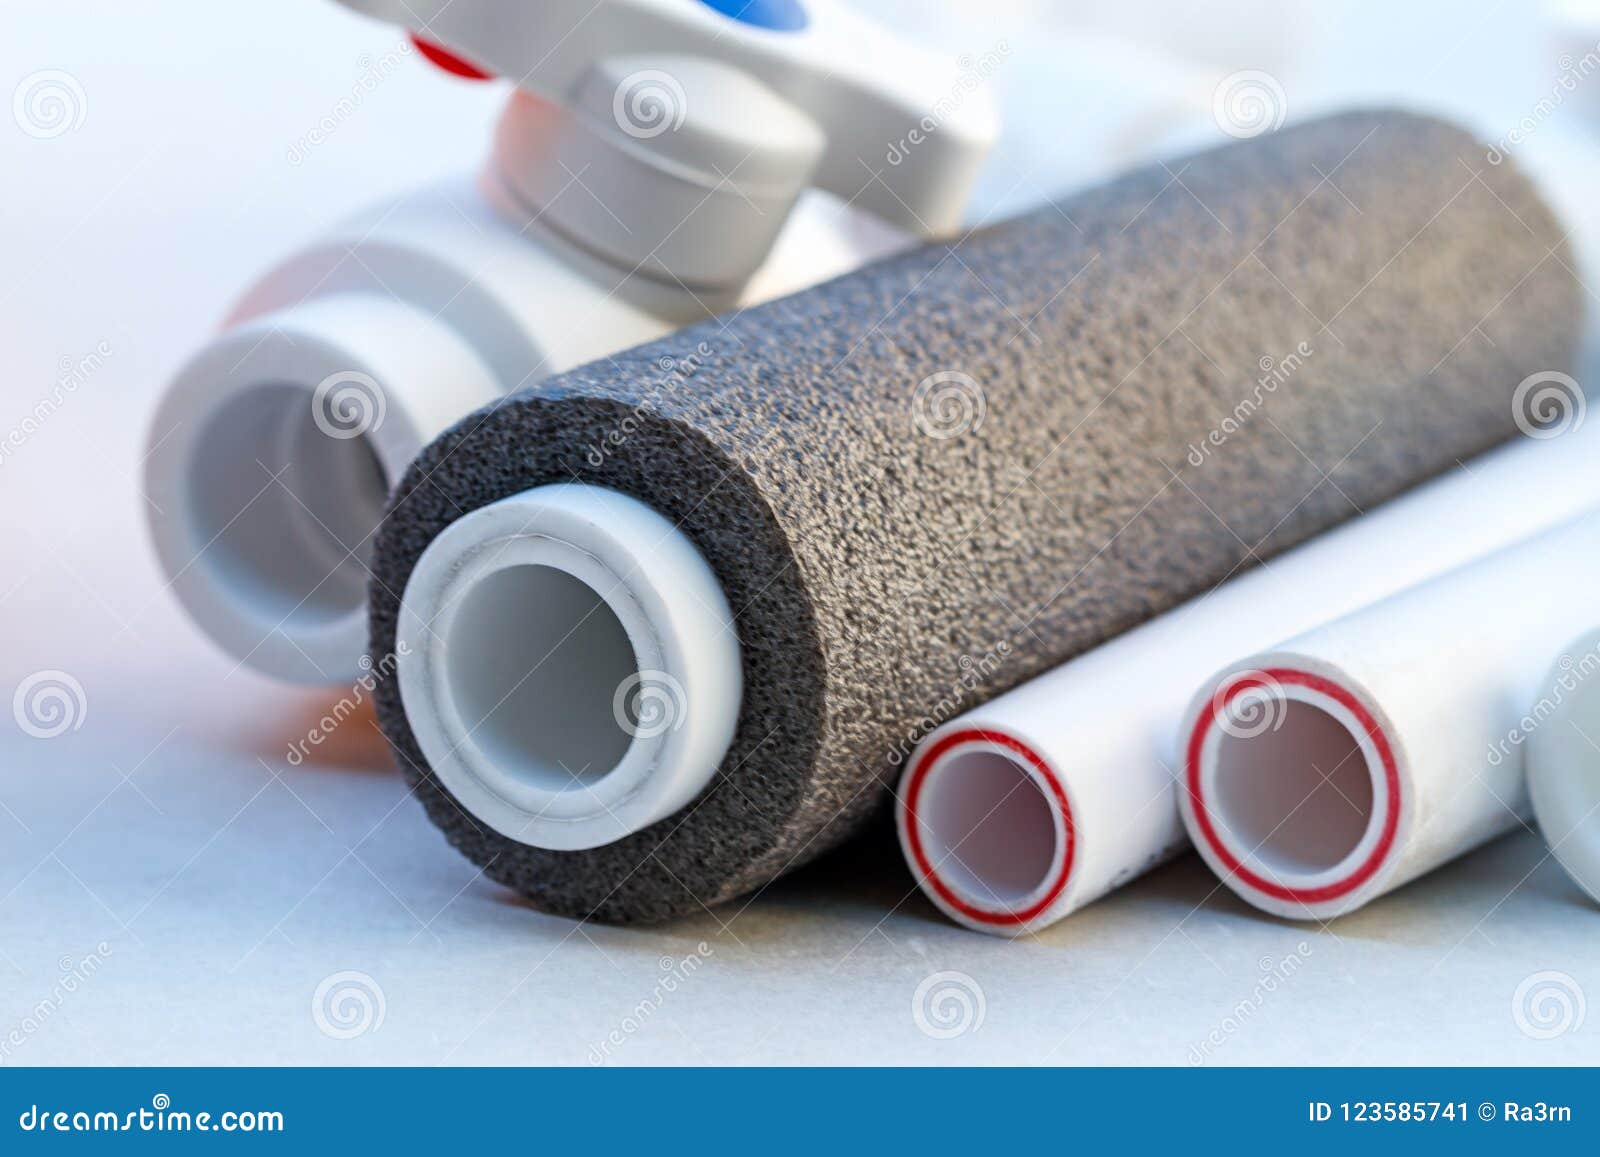 polypropylene pipe sections and insulation